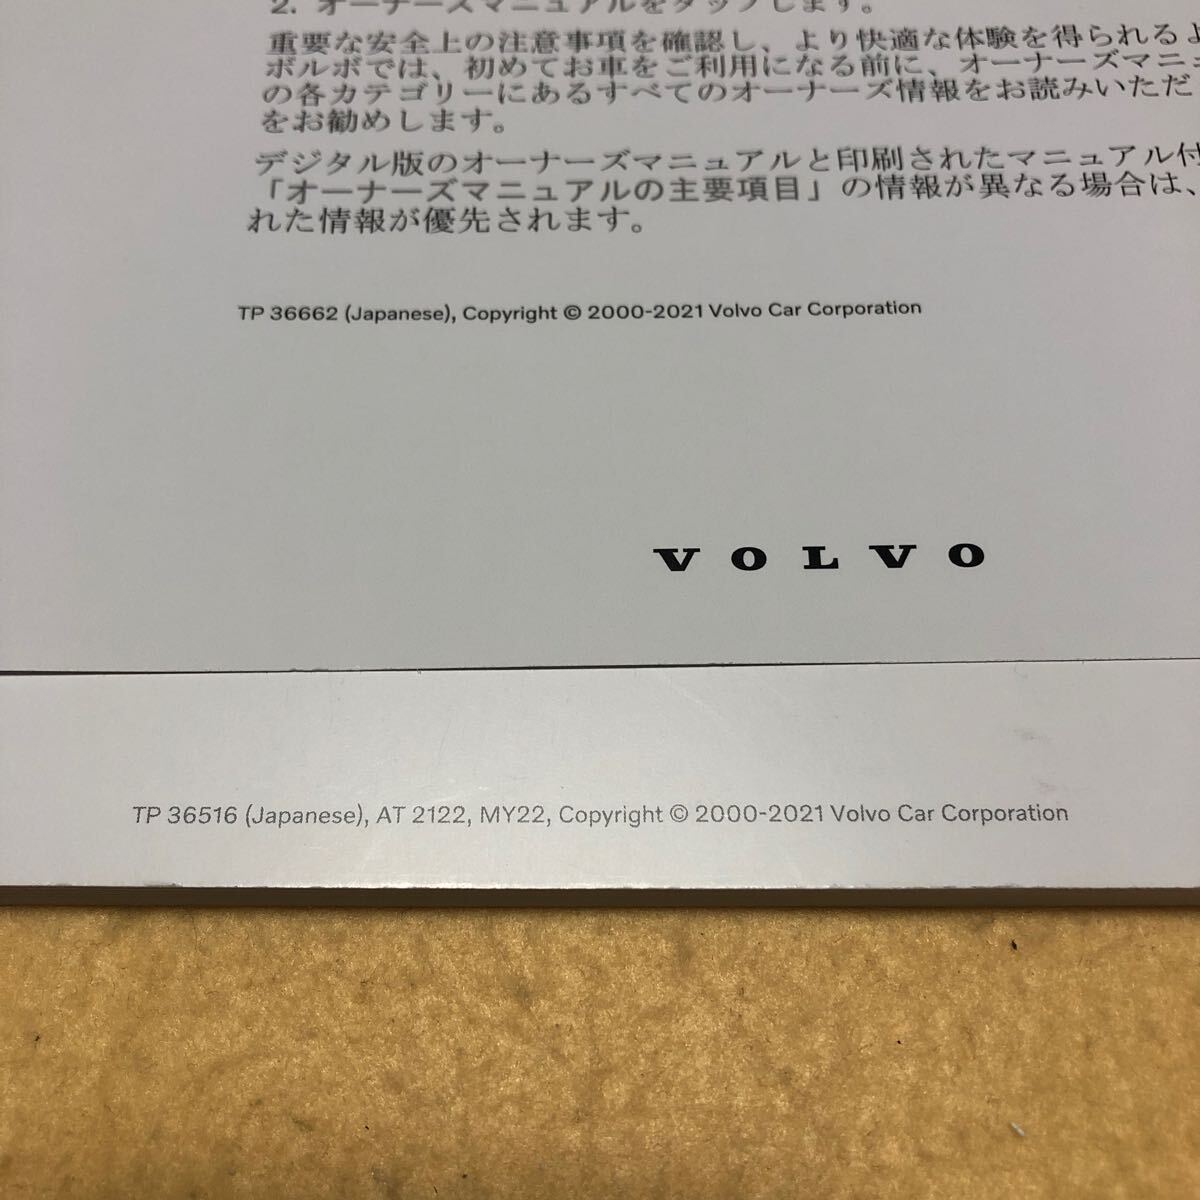  Volvo XC40 2021 year . peace 3 year XB420TXCM owner's manual 6 point set used *